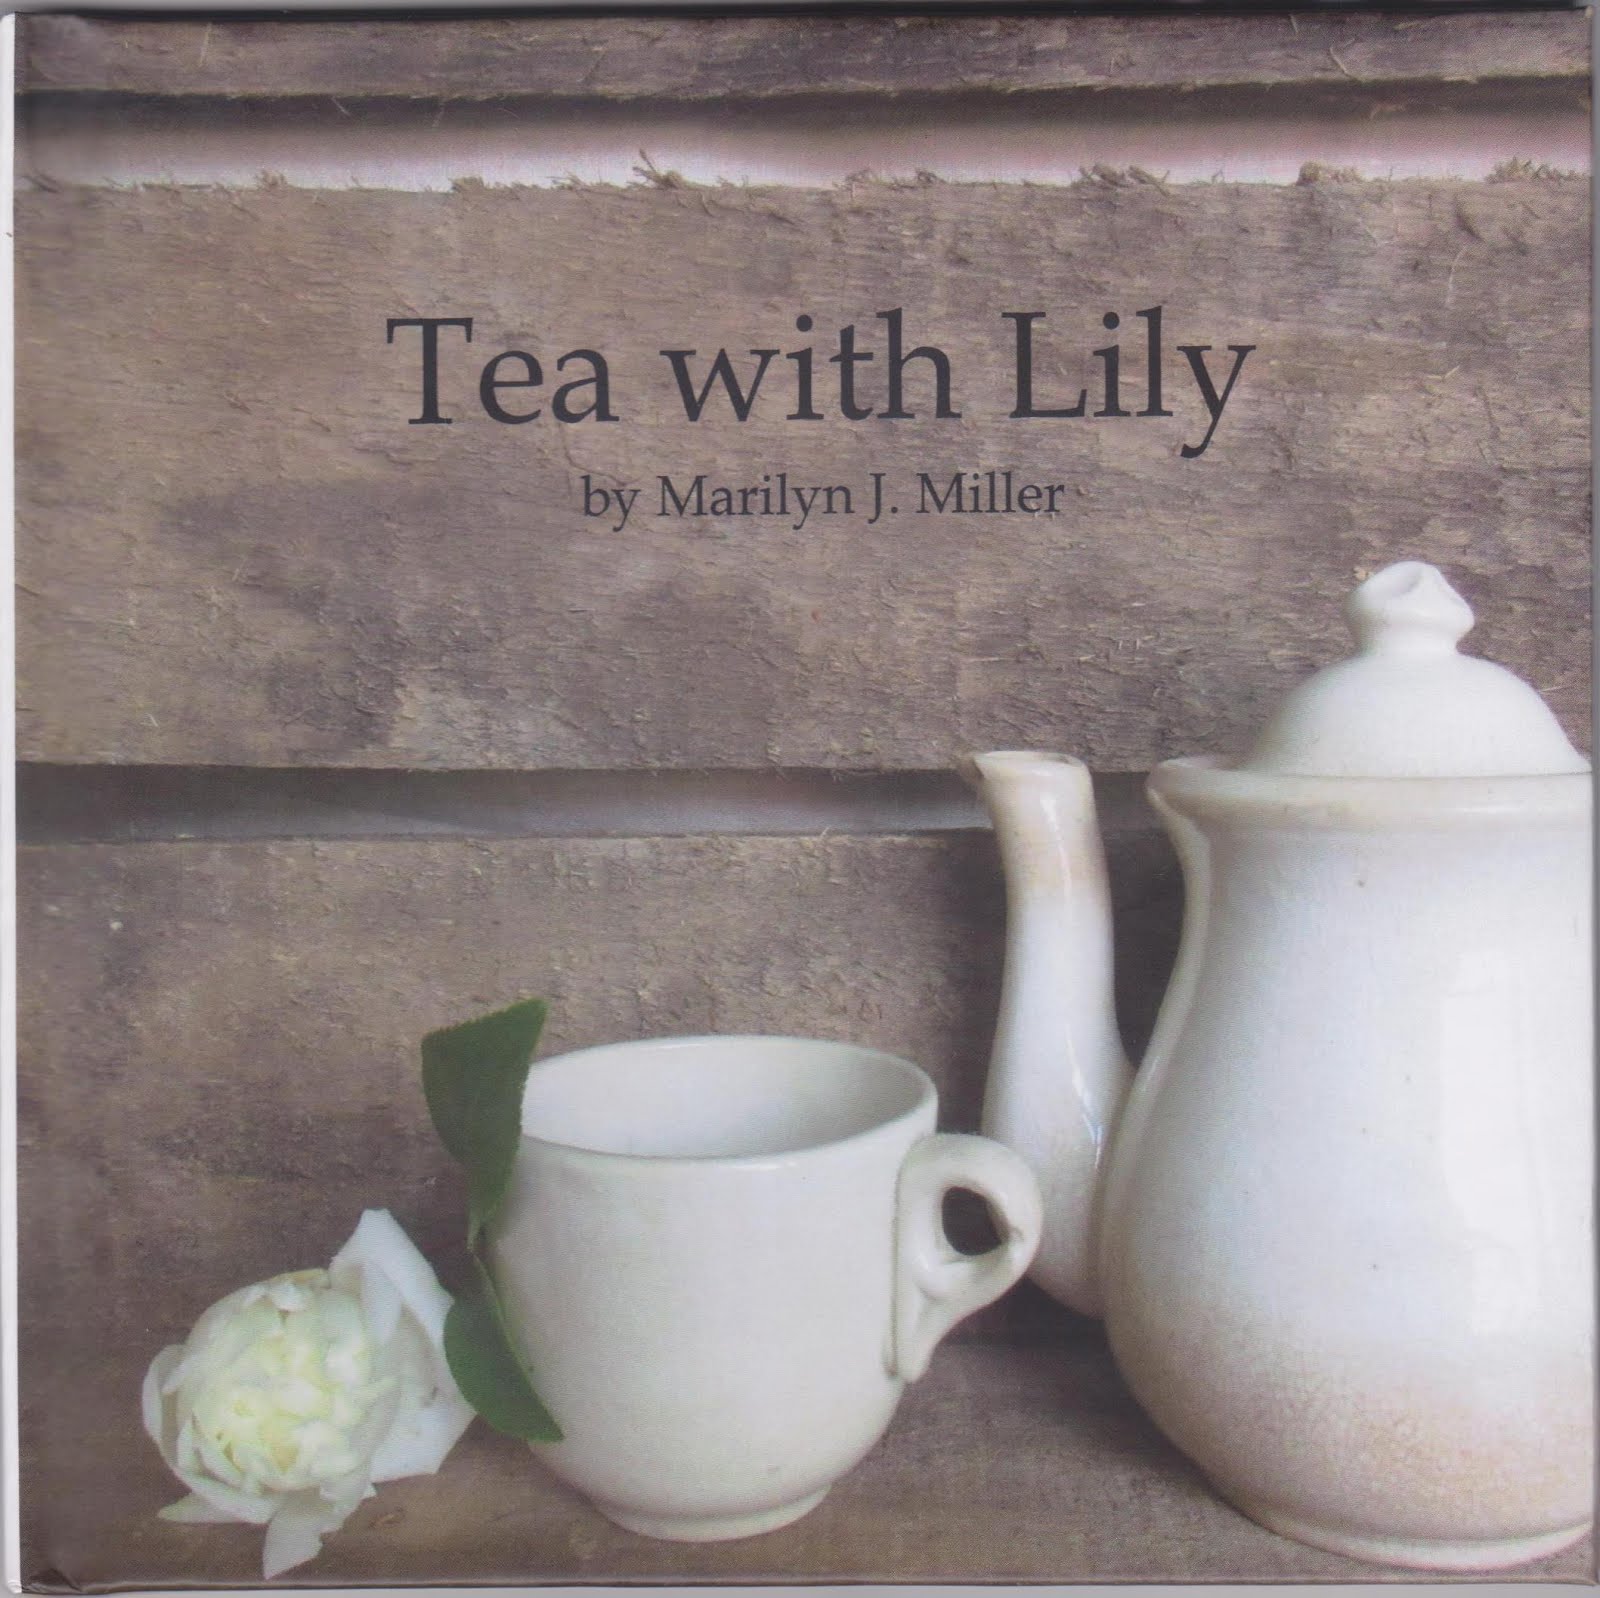 Tea Party in your Cupboard, Tea Outdoors, Tea with Lily